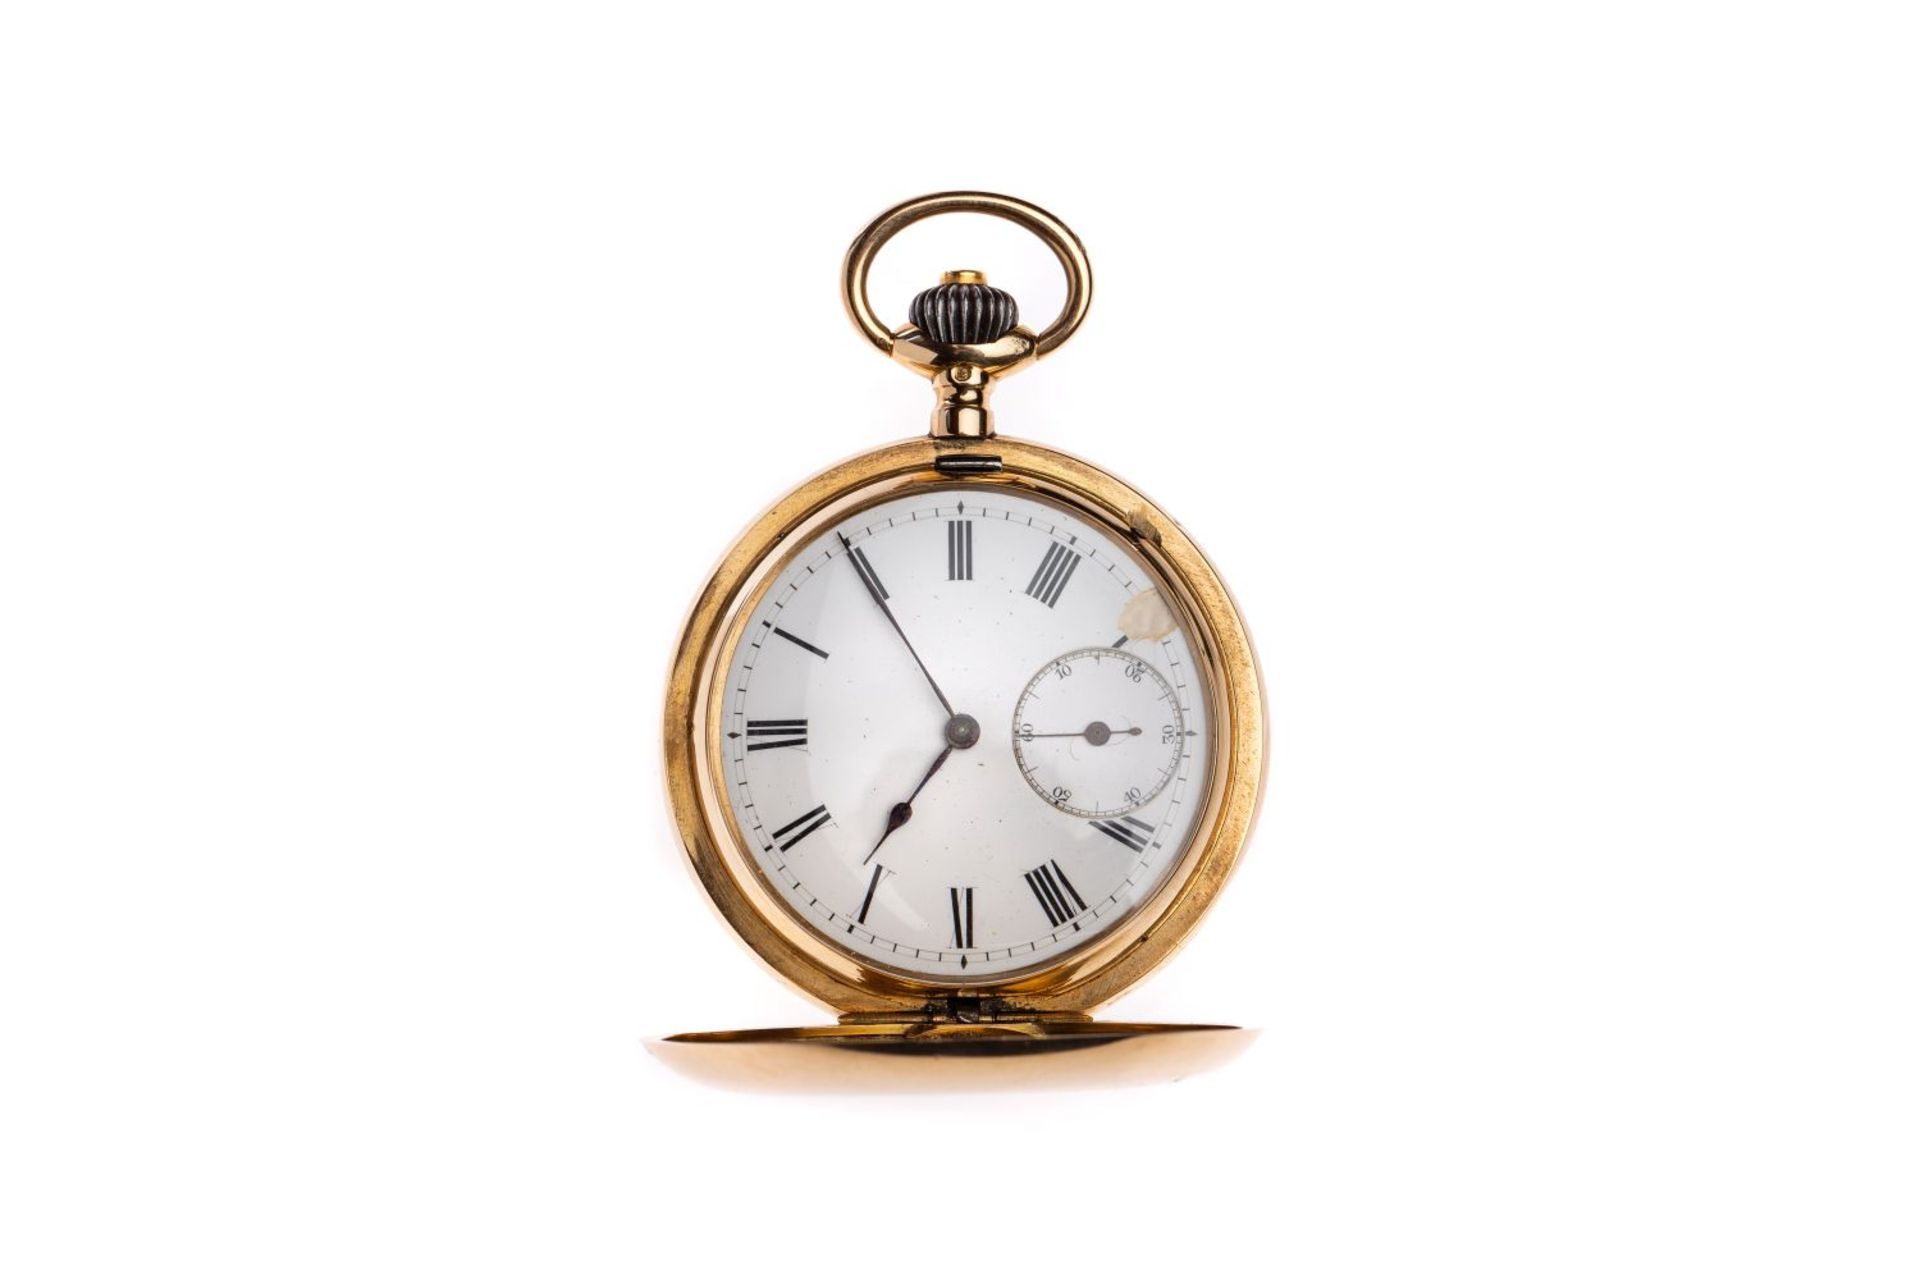 Lepine pocket watch14ct yellow gold watch from Omega with chain so called Lepine pocket